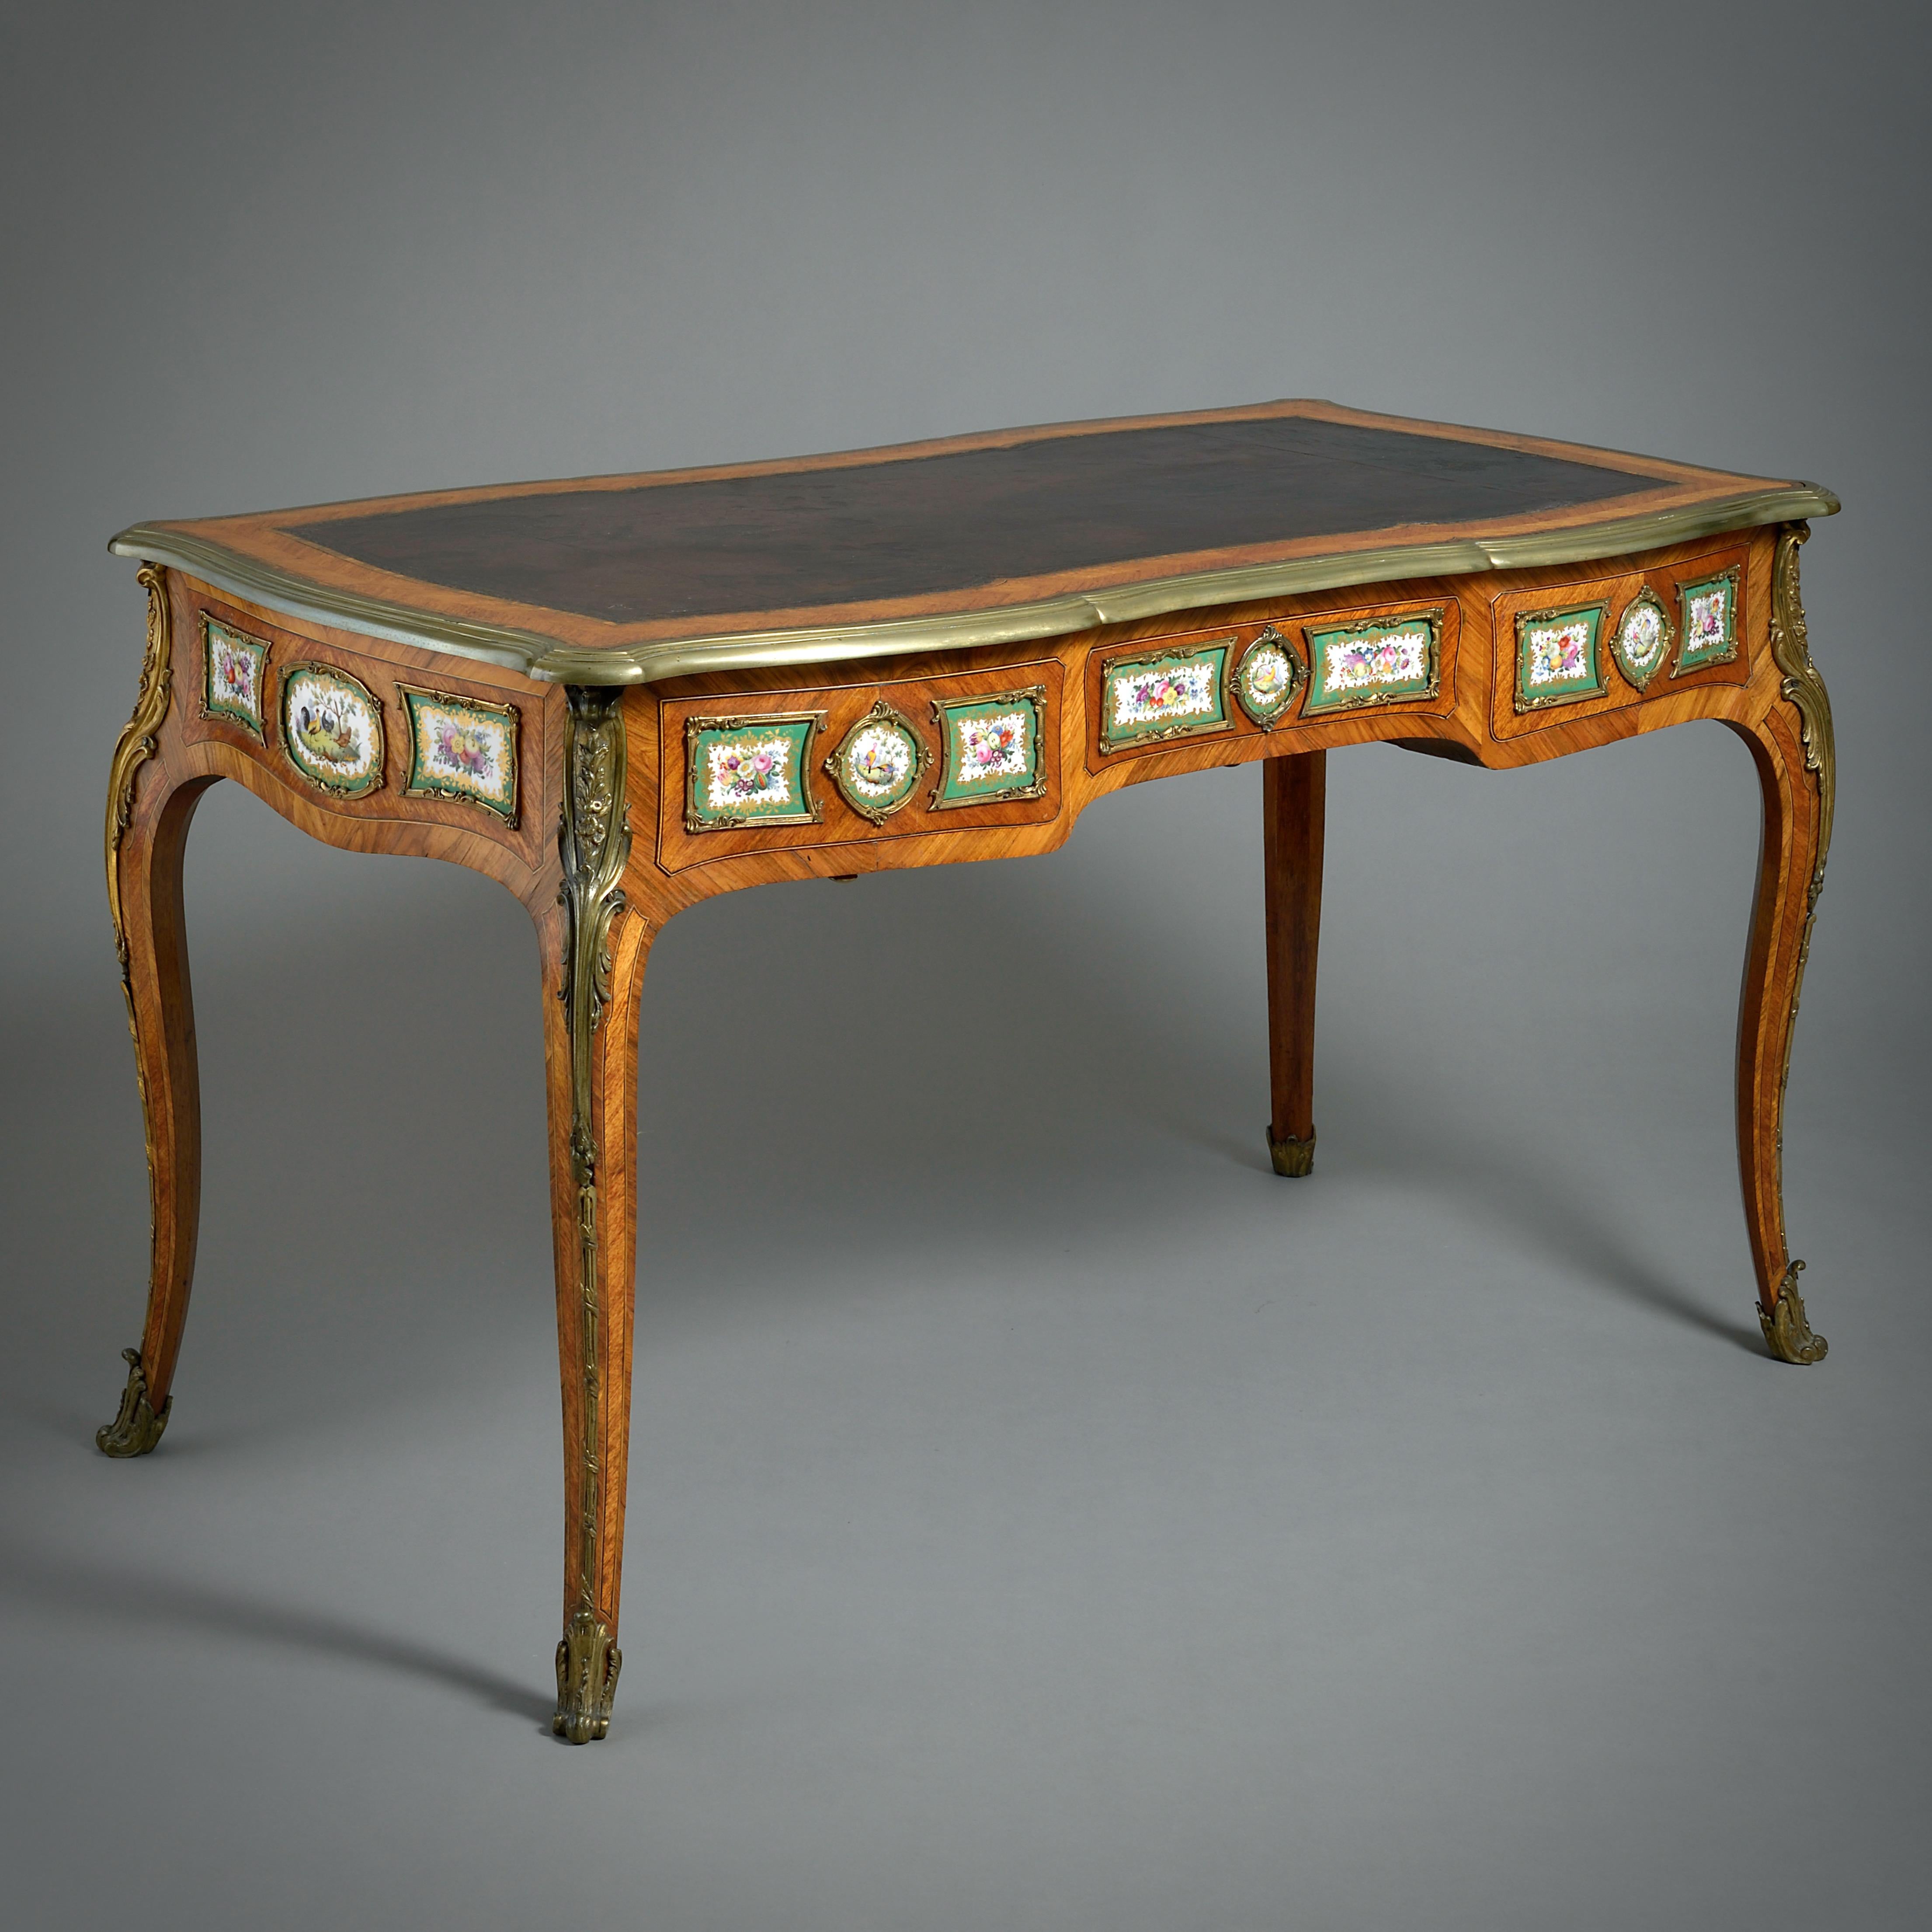 Early Victorian Porcelain and Ormolu-Mounted Kingwood Bureau-Plat In Good Condition For Sale In London, GB